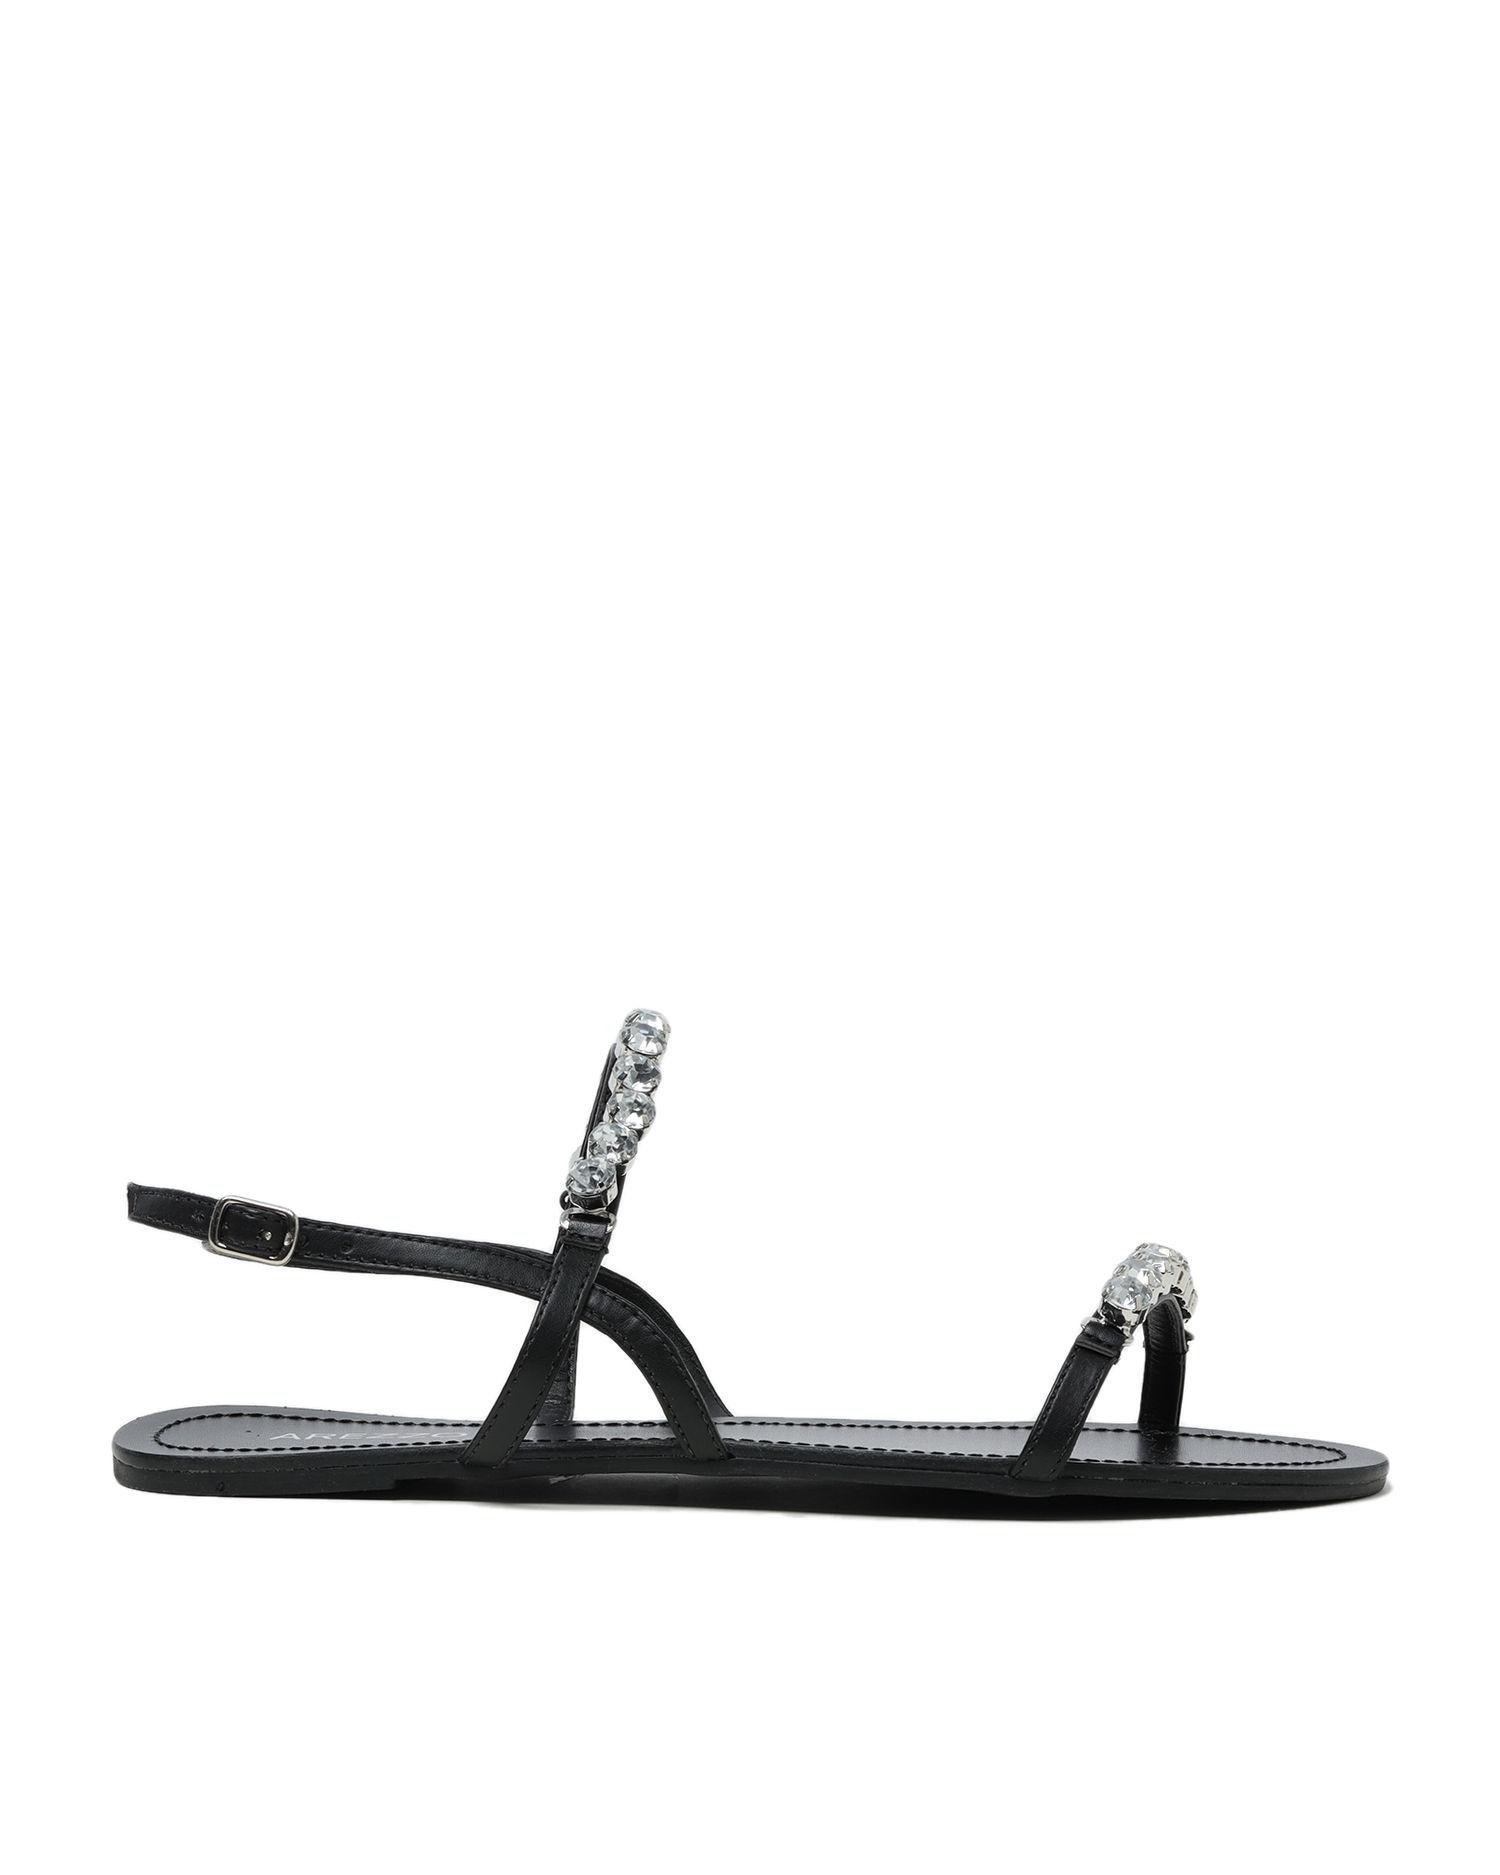 Crystal embellished sandals by AREZZO